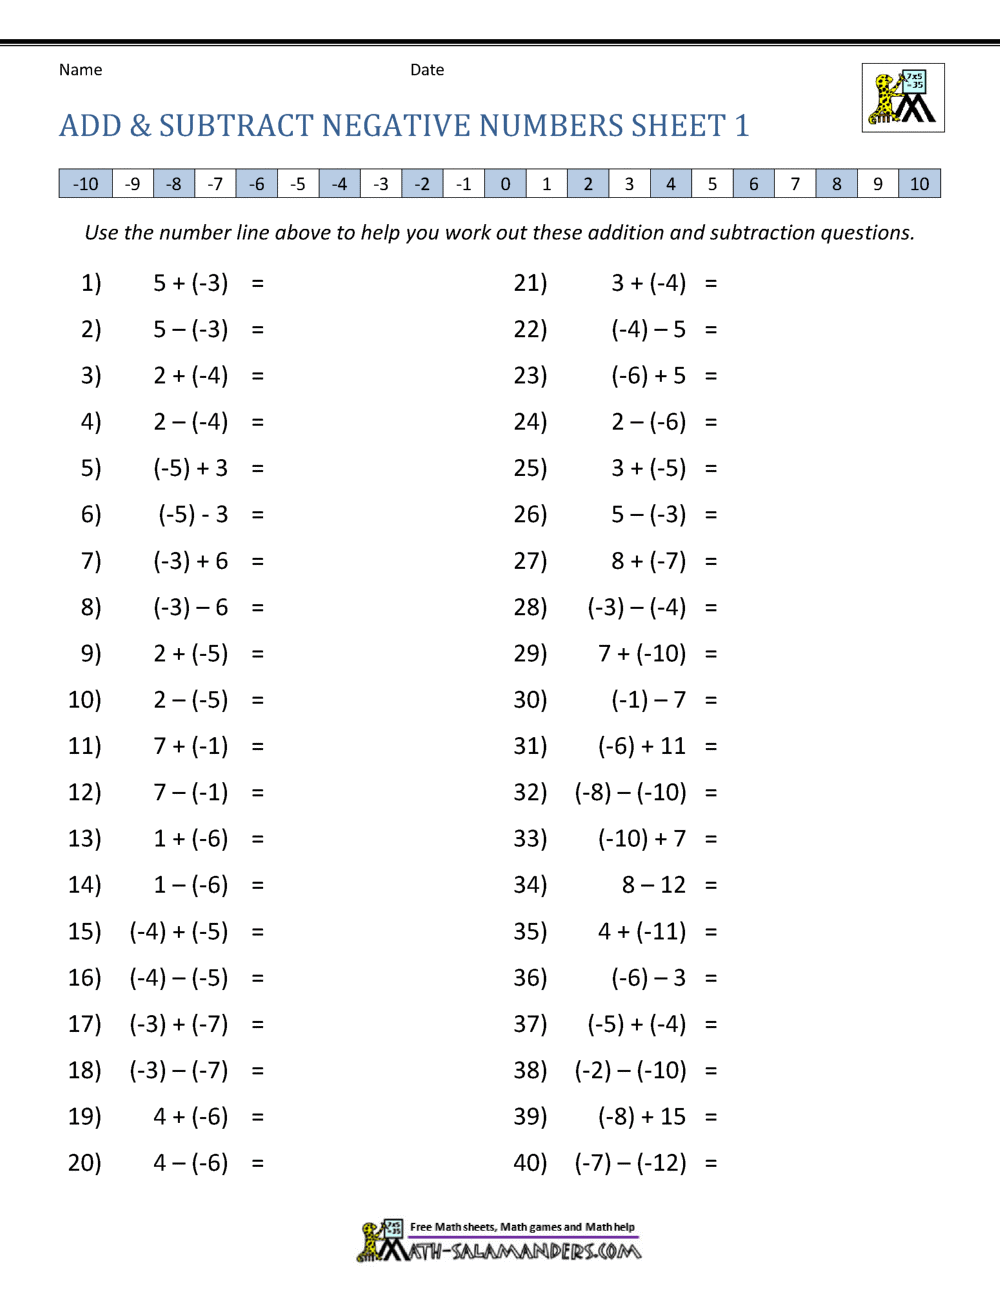 Adding and Subtracting Negative Numbers With Regard To Adding Integers Worksheet Pdf